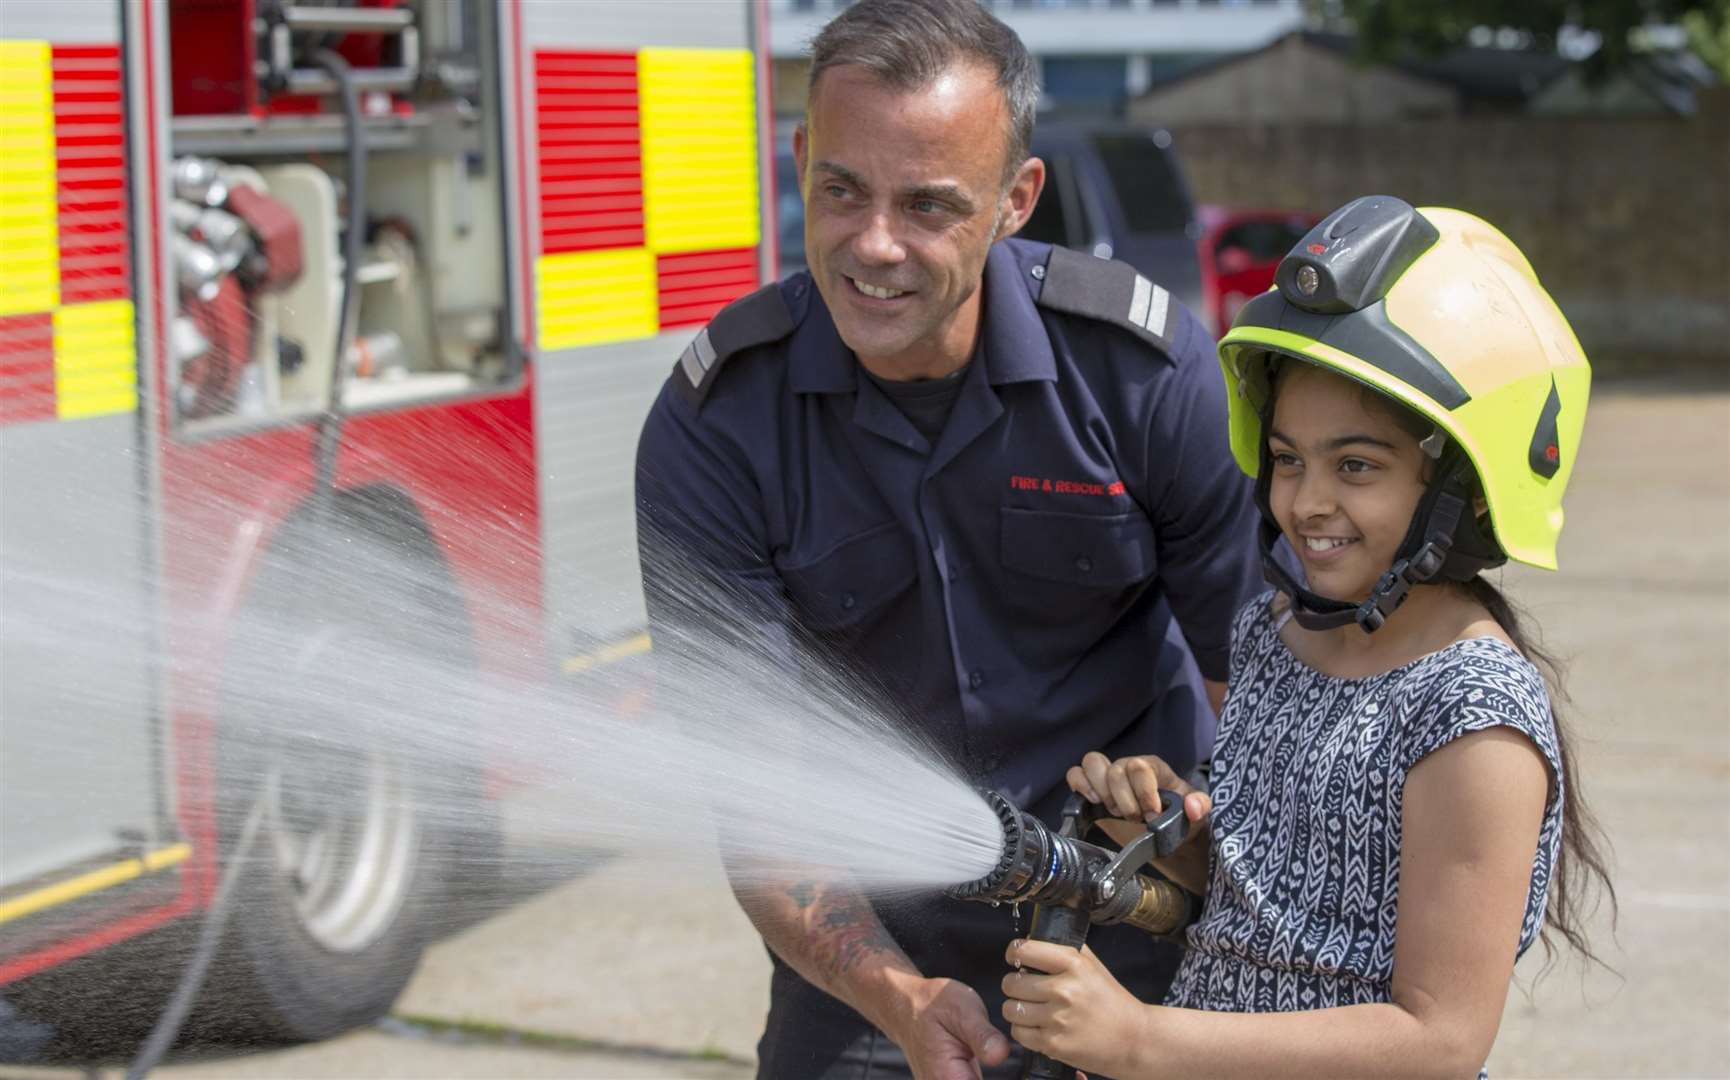 Kent Fire and Rescue Service will hold its first open day online